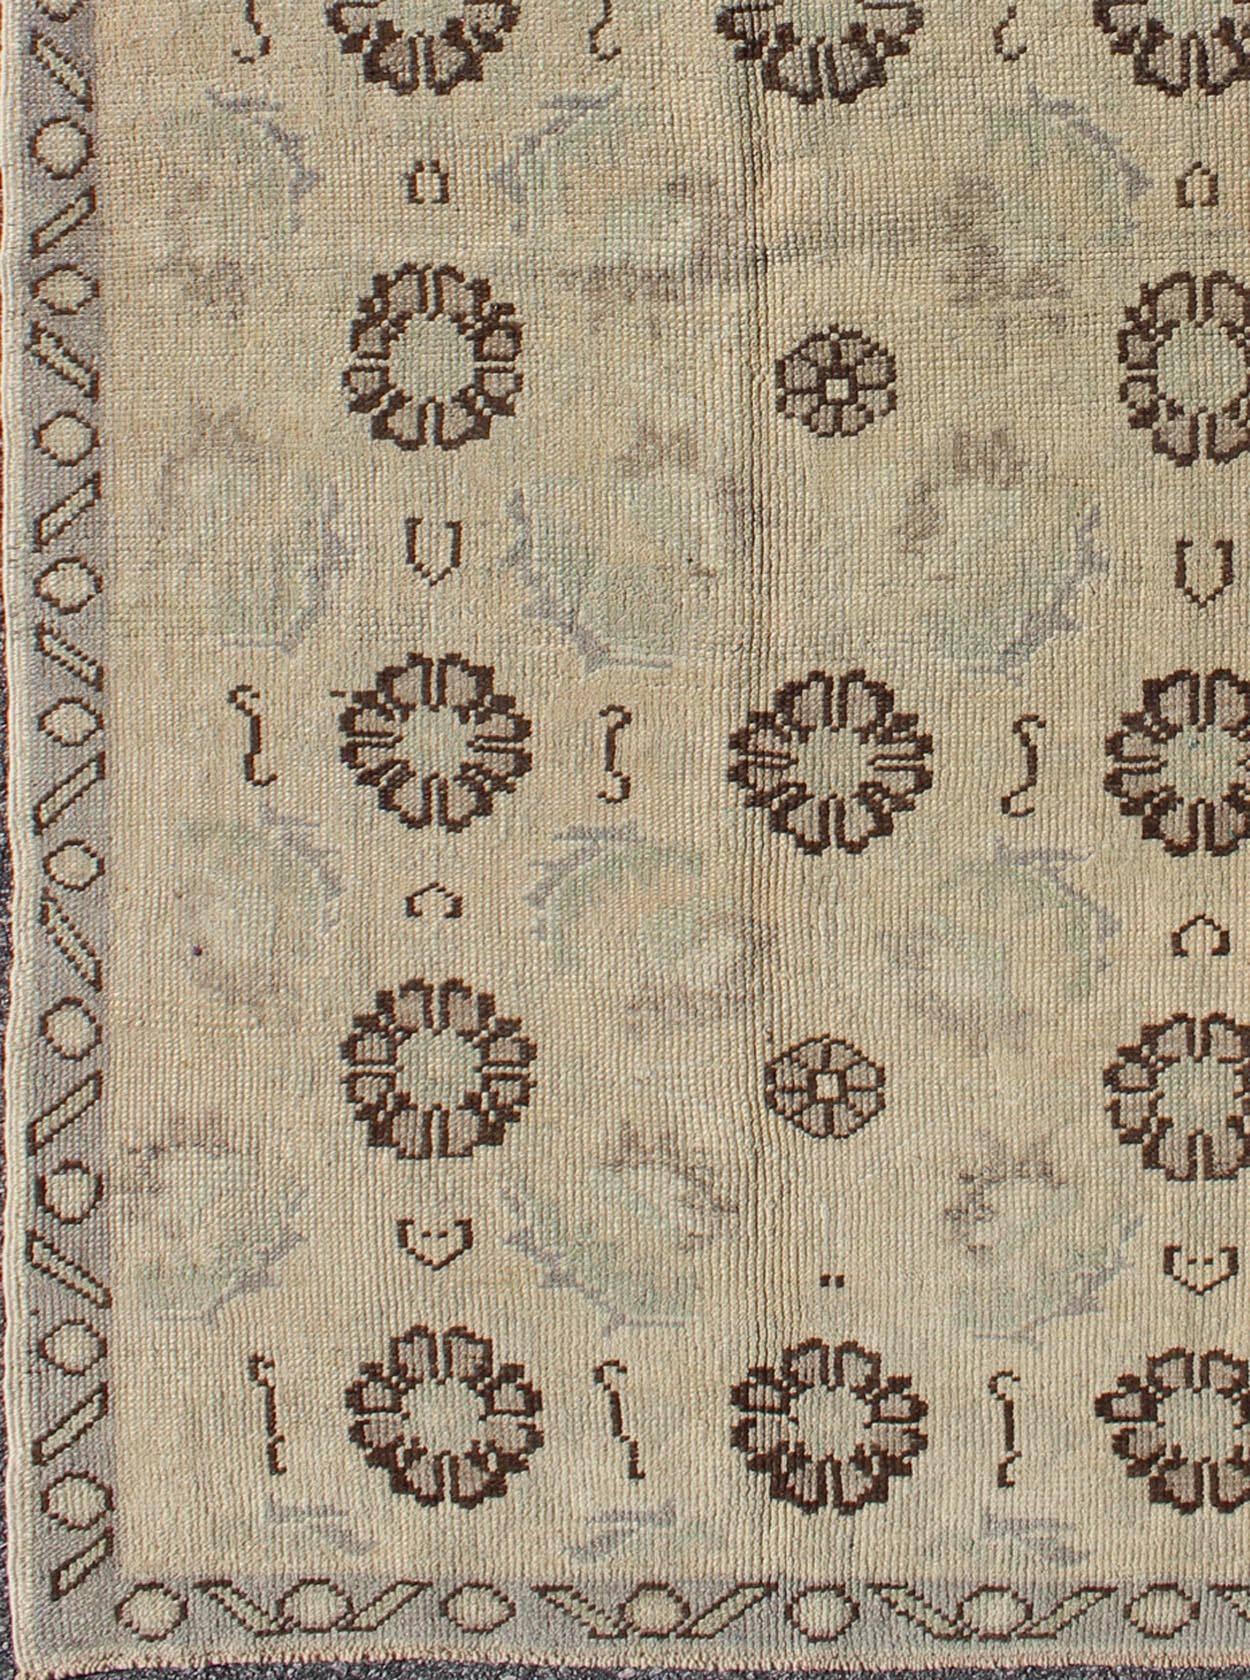 Blossom and tribal design vintage Turkish Oushak rug in nude, taupe, gray, brown, rug tu-TRS-136520, country of origin type: Turkey Oushak, circa 1930.

This Oushak carpet (circa 1930) features an all-over pattern of floating vertically-arranged